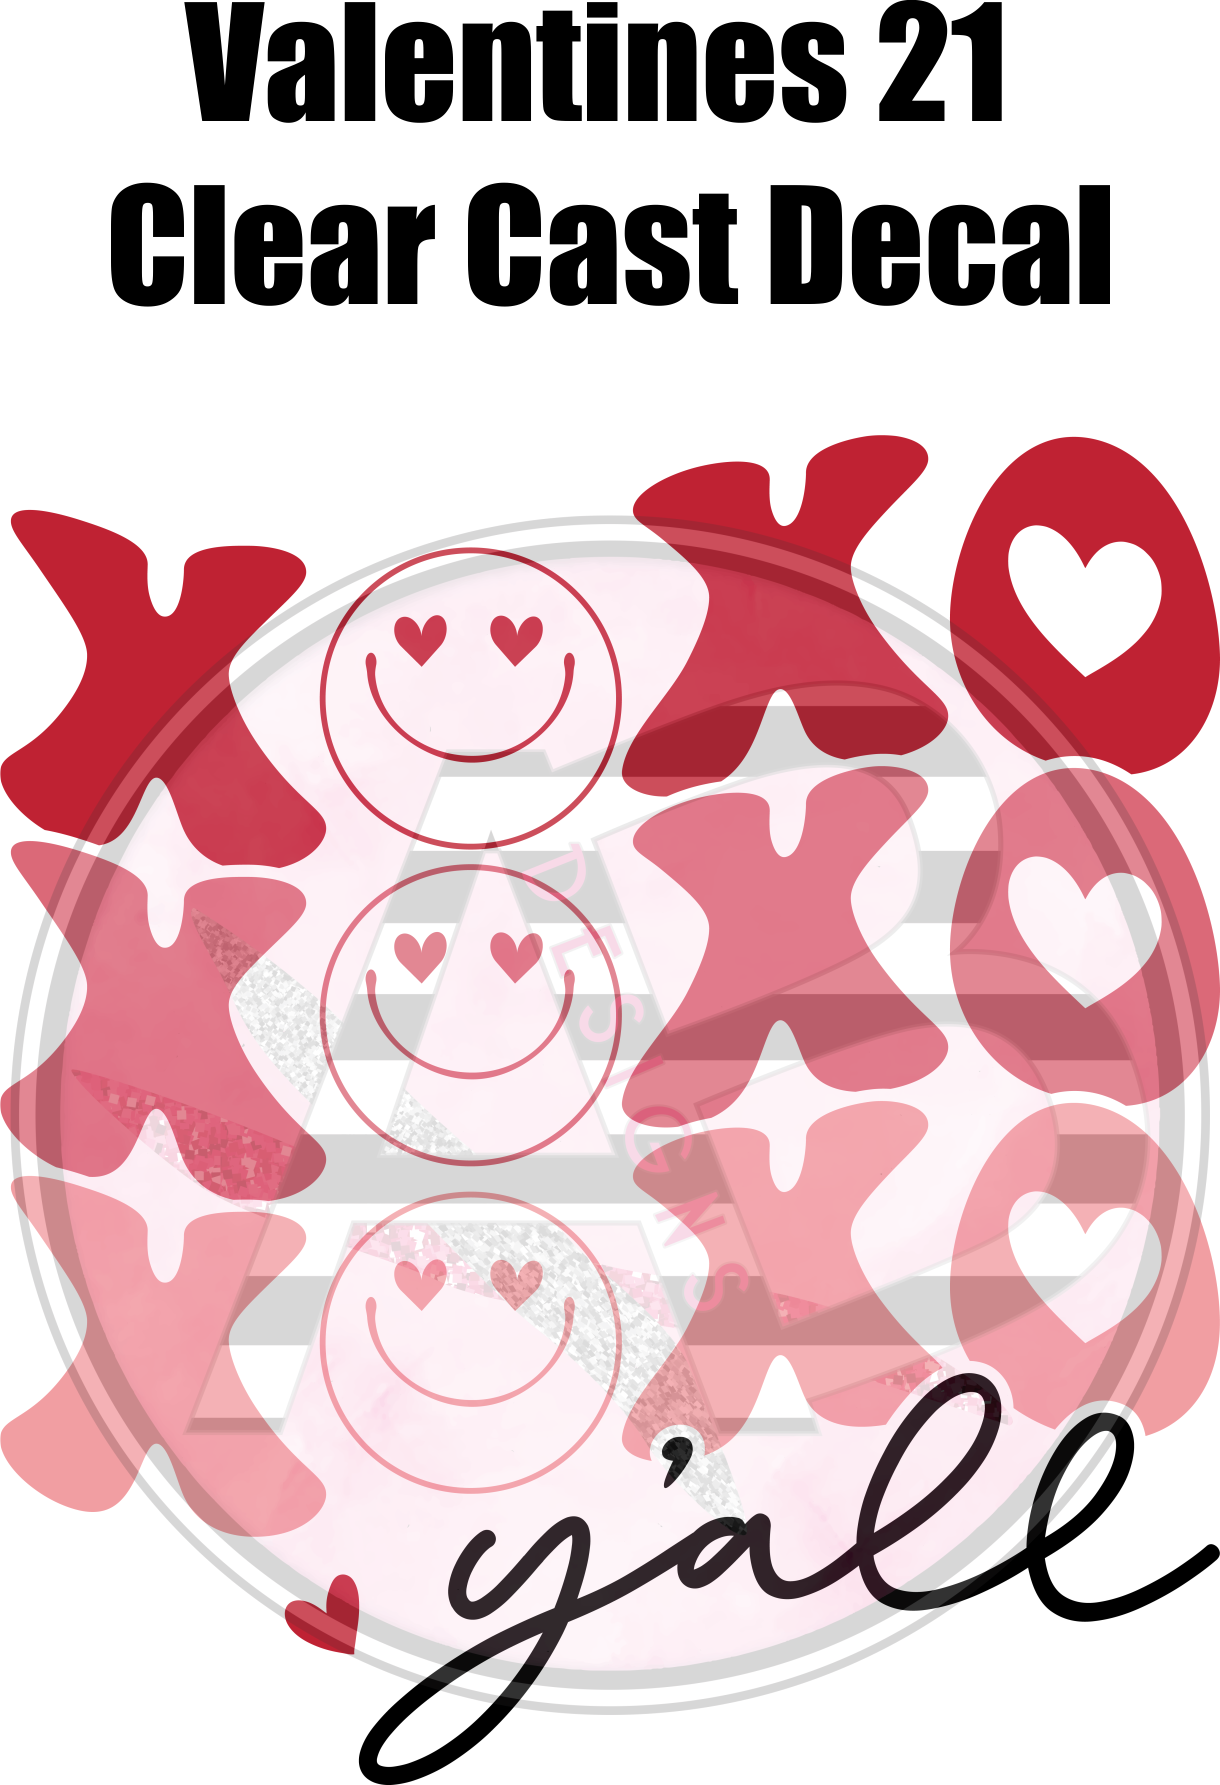 Valentines 21 - Clear Cast Decal